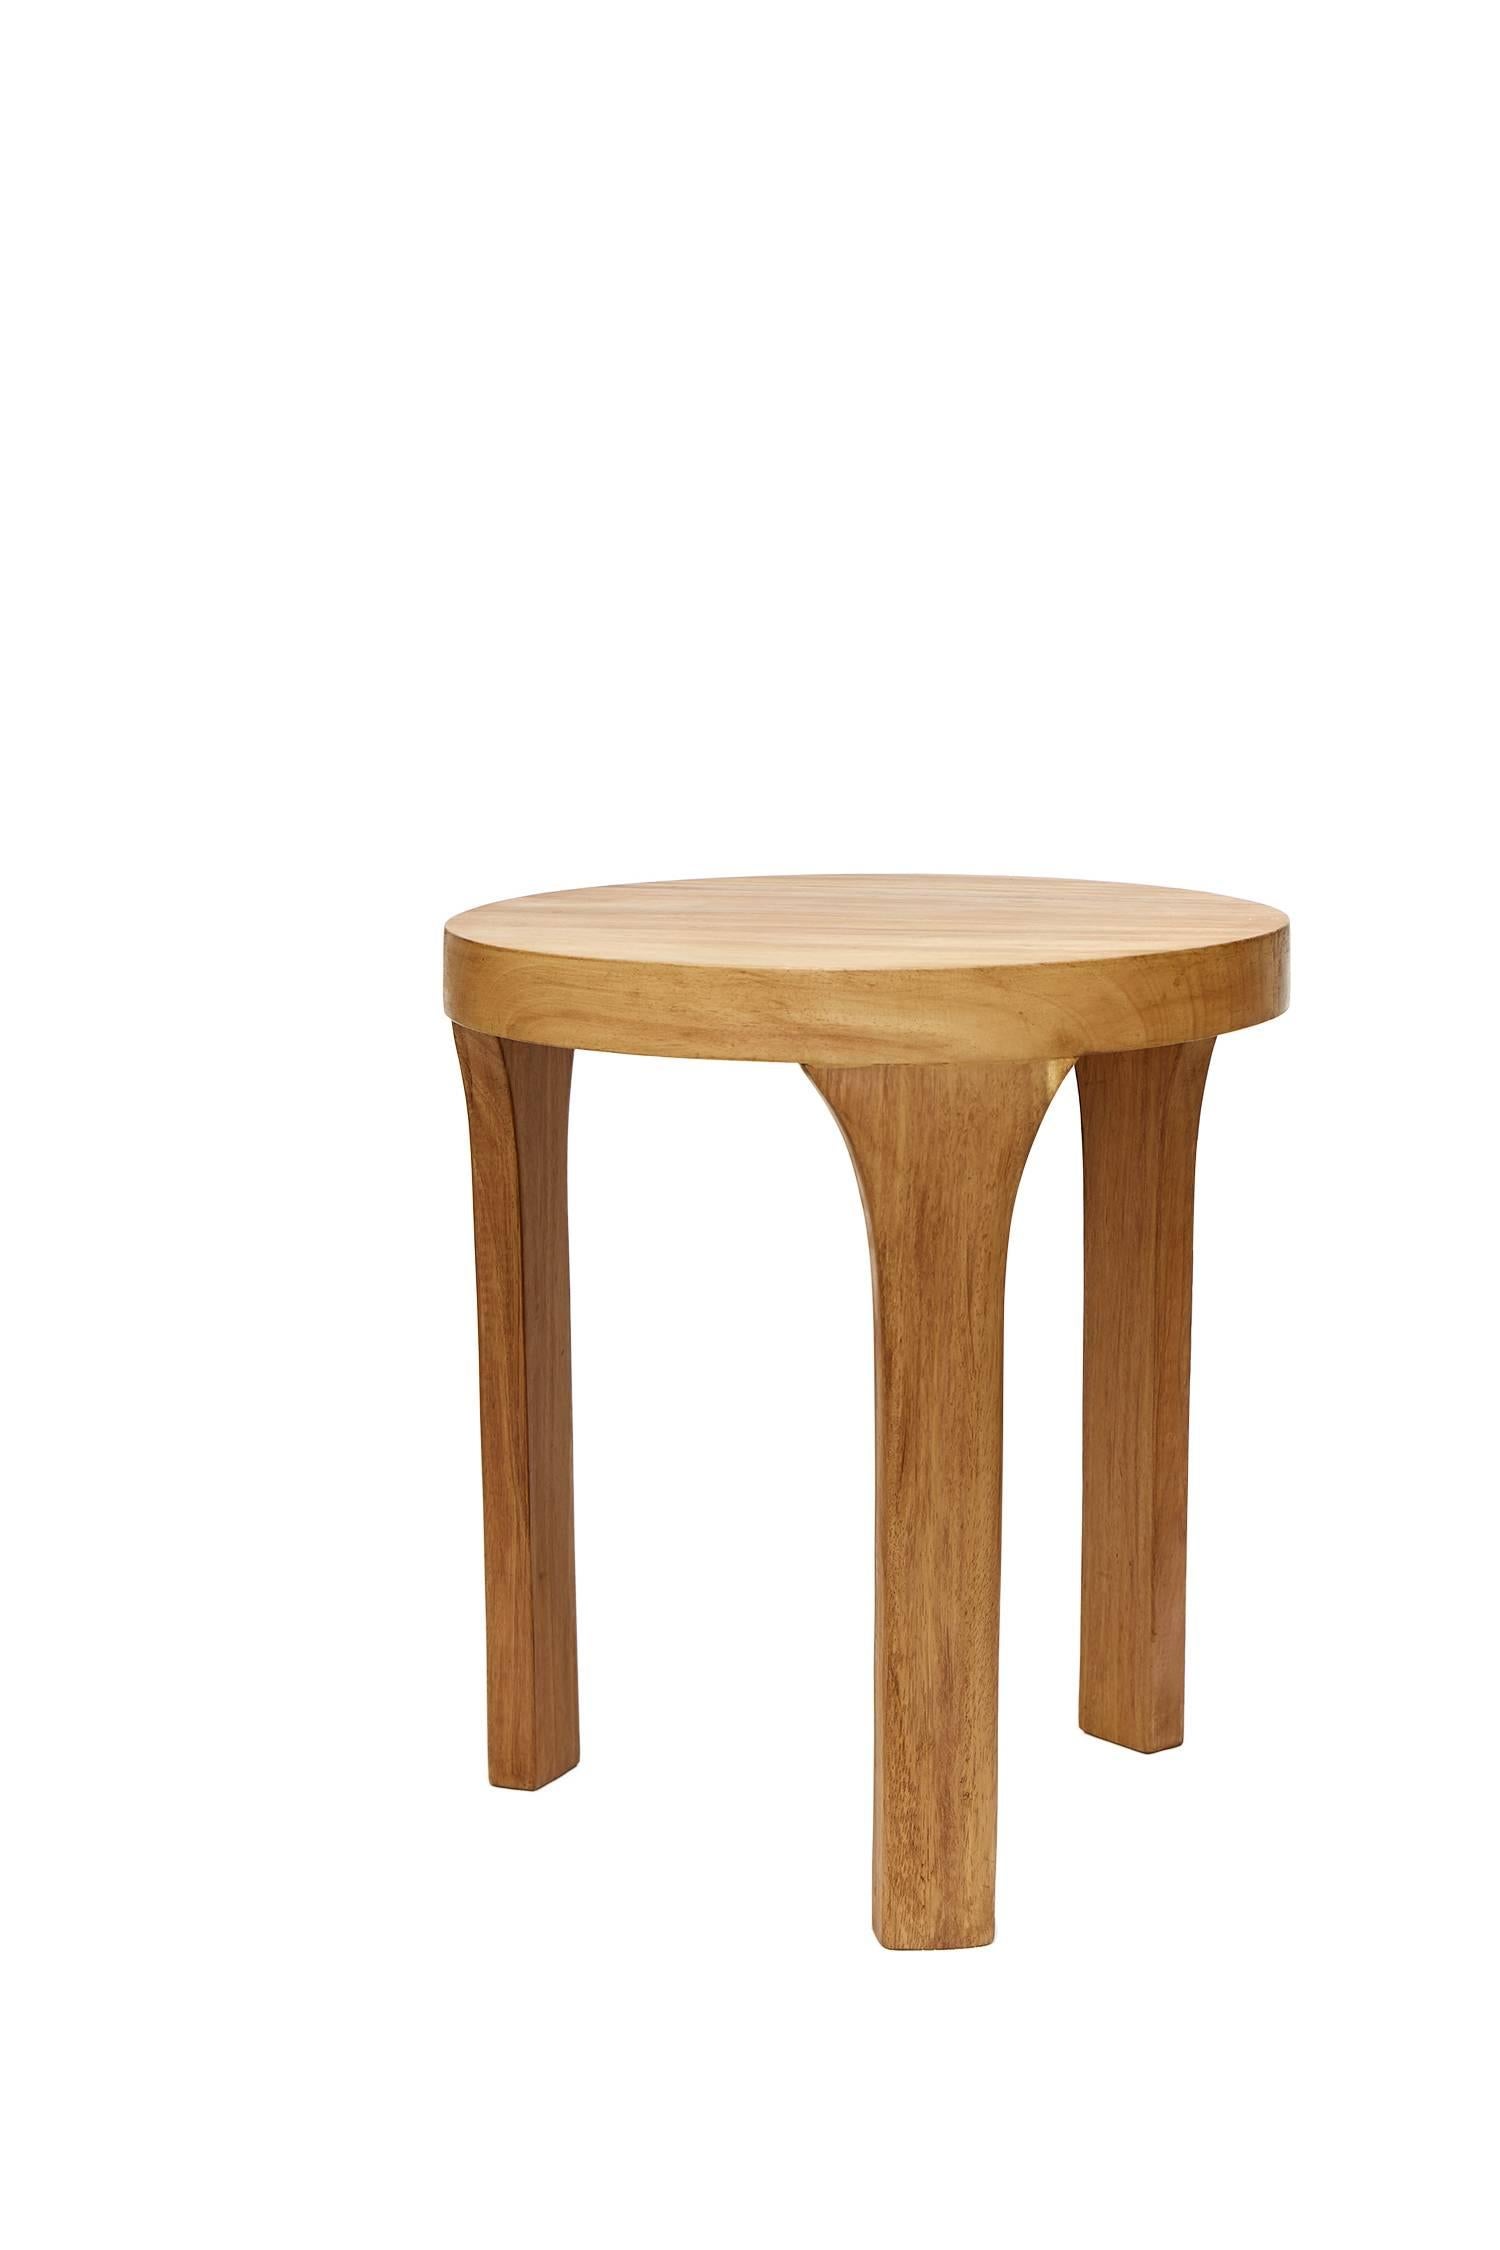 centre table wood